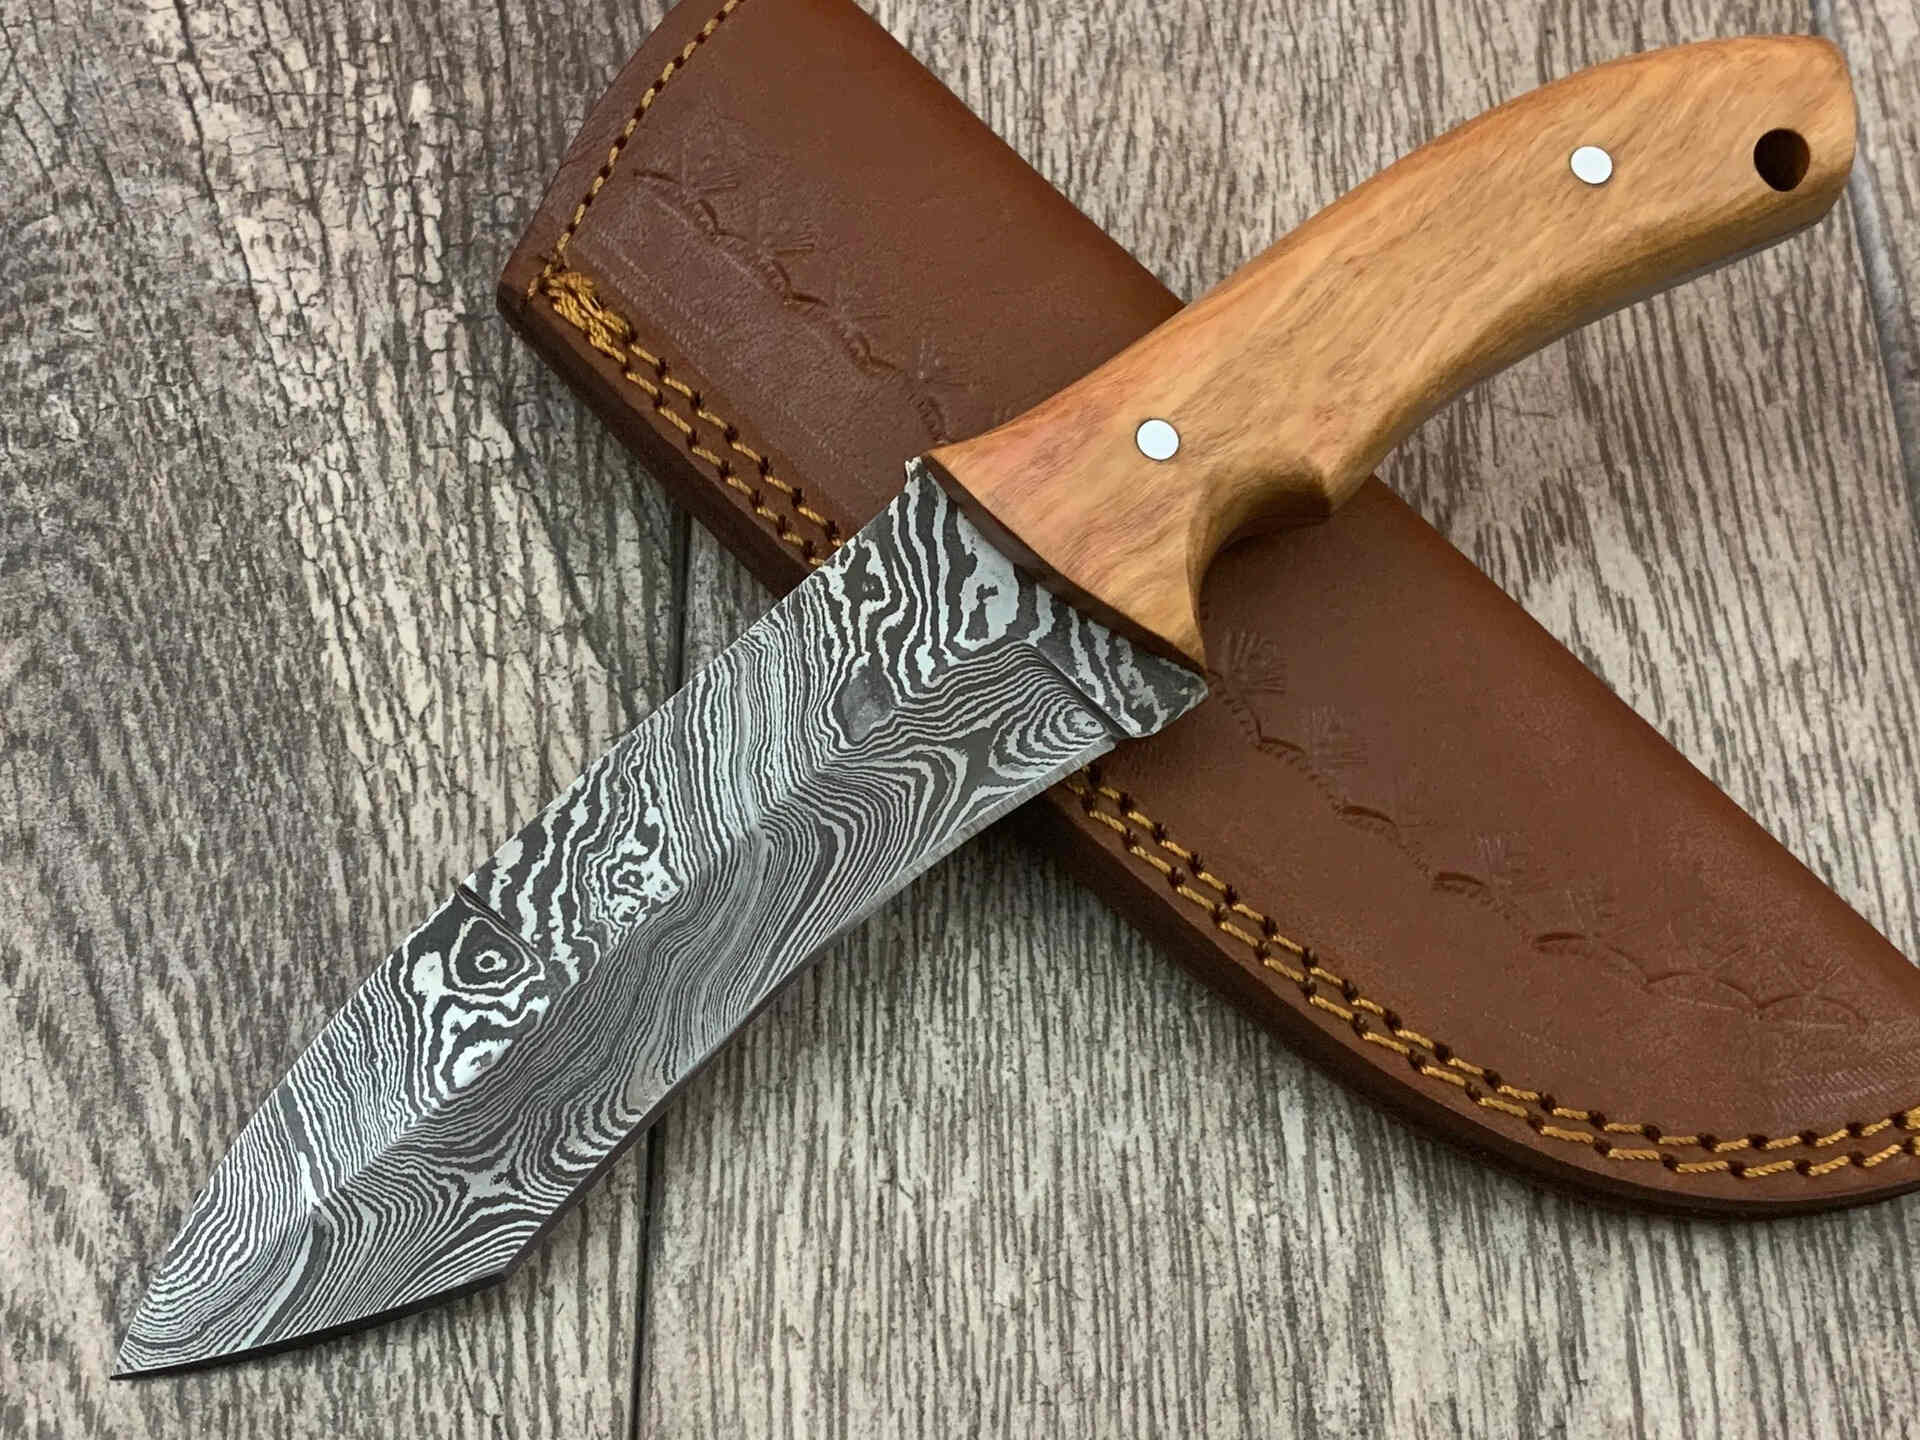 Care and maintenance of Damascus steel